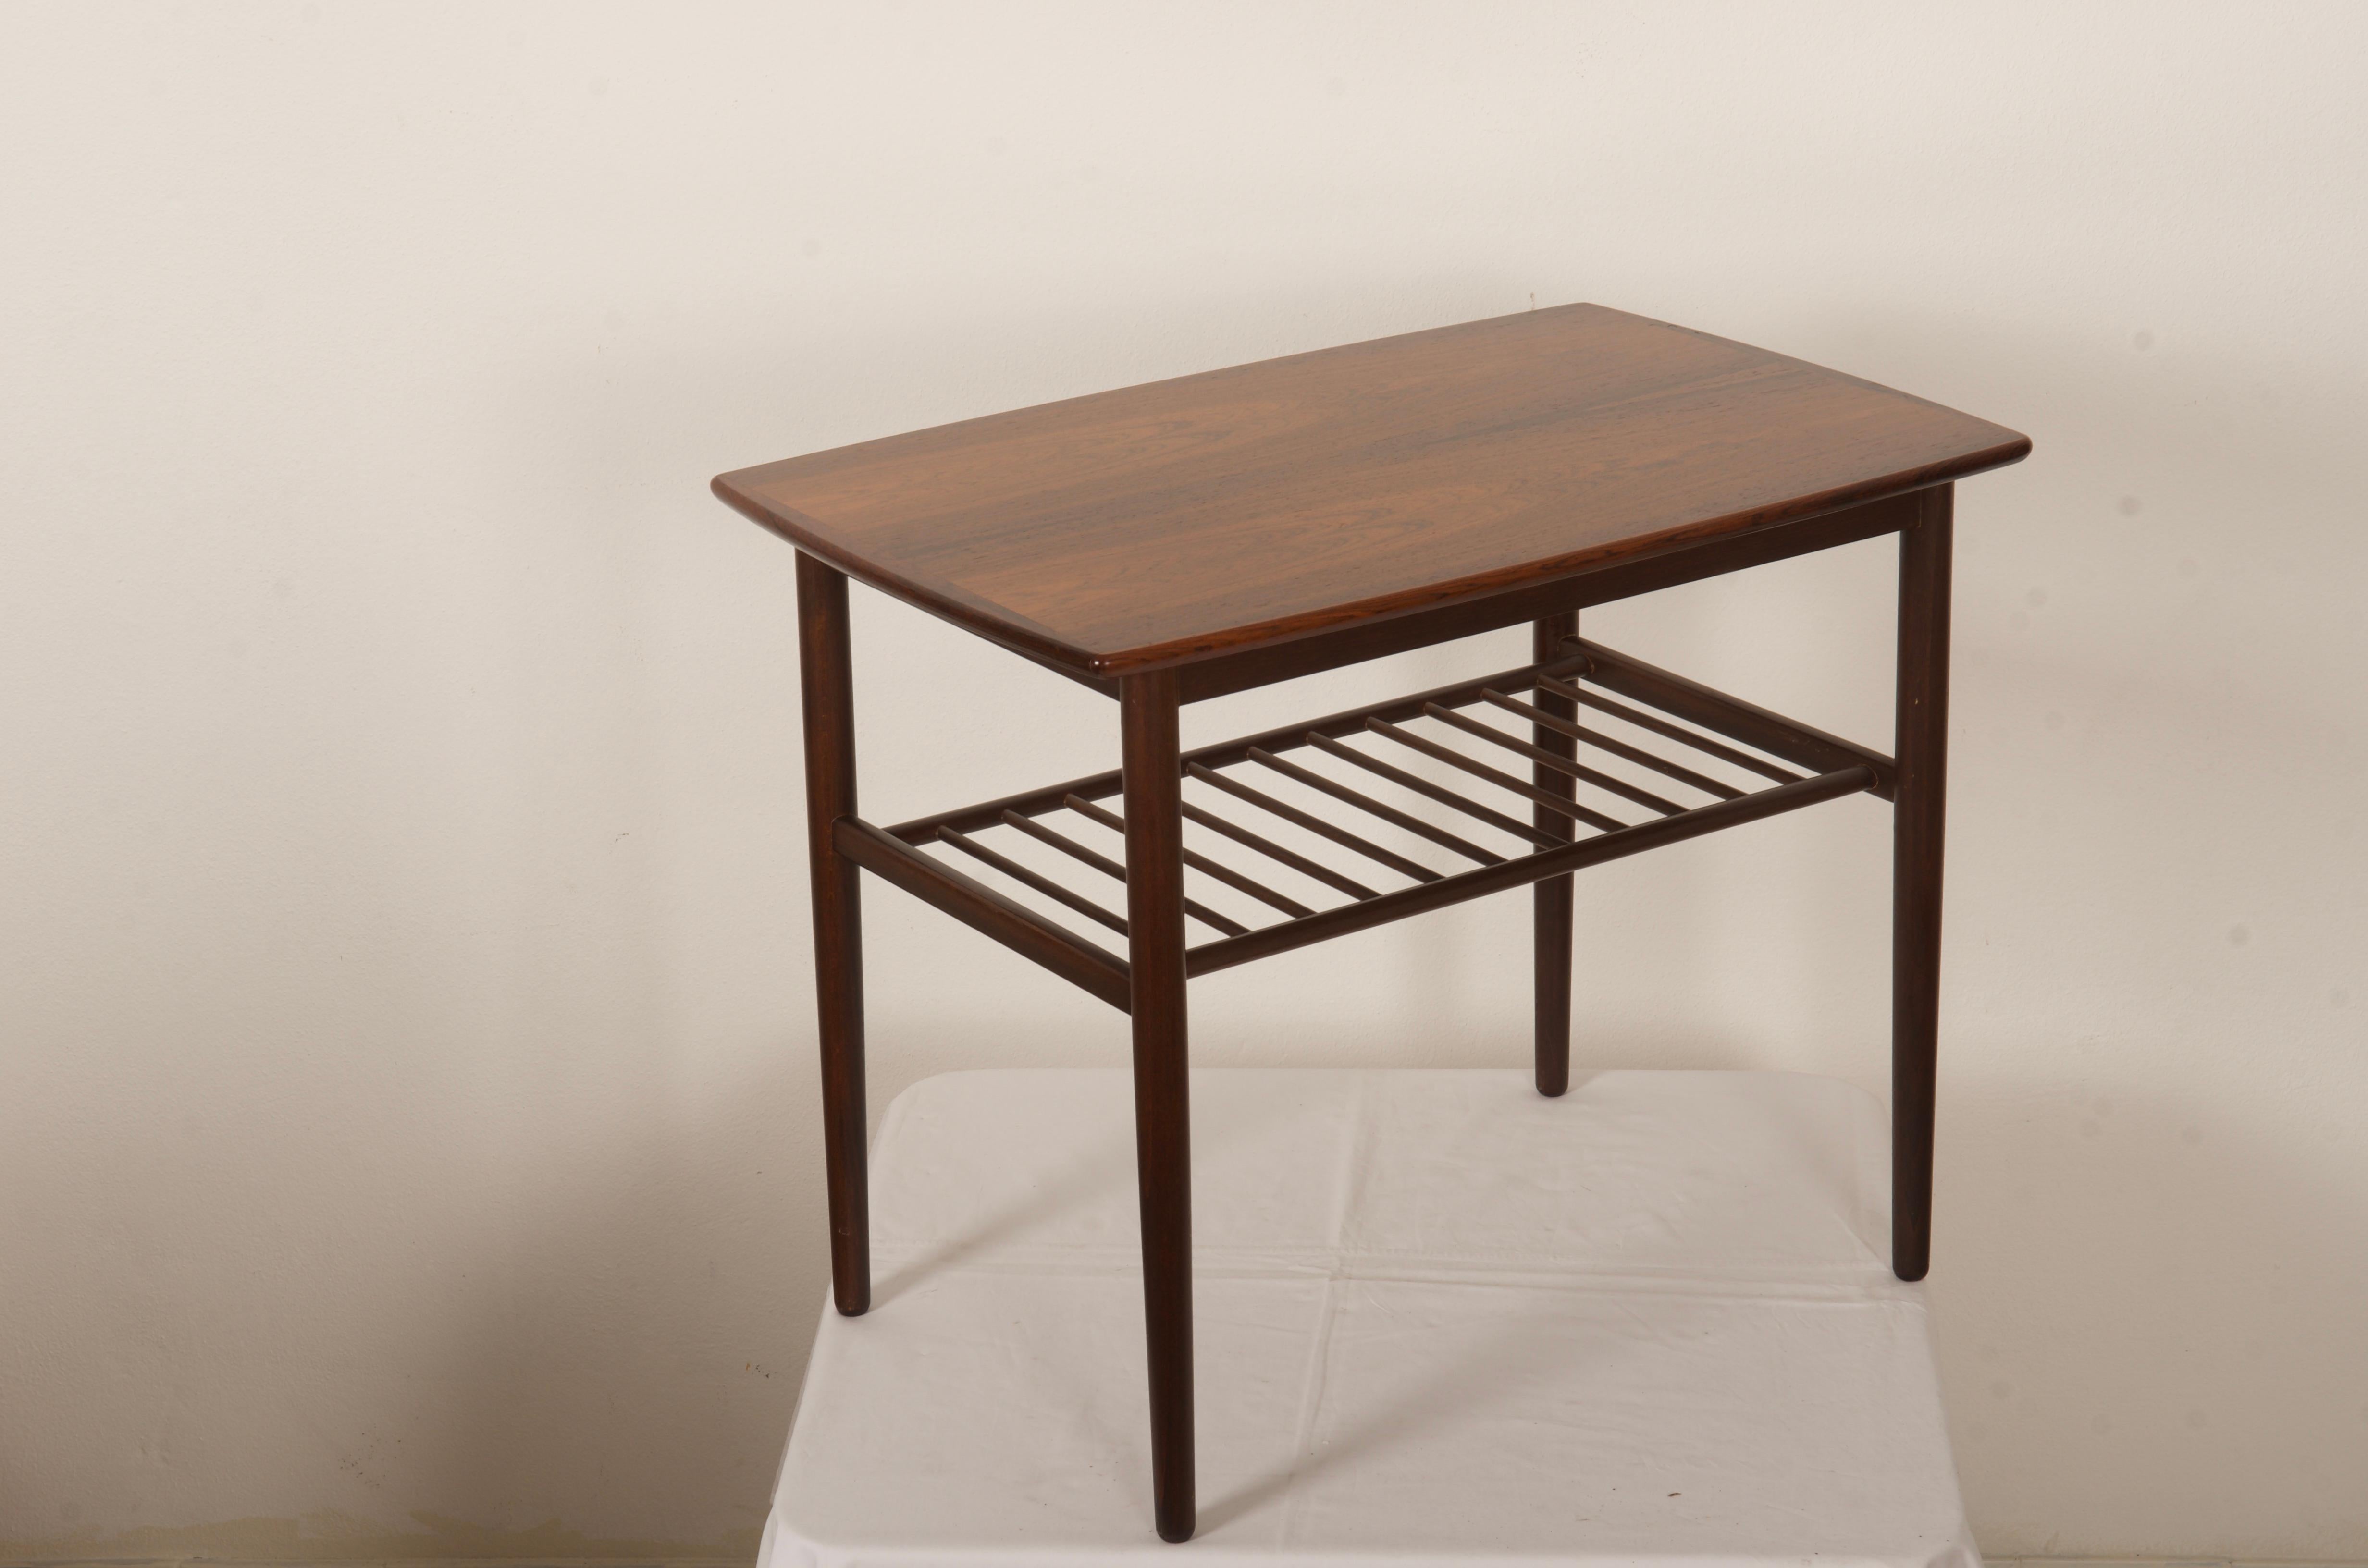 Hardwood side tabel with grid compartment, made in Denmark in the late 1960s.